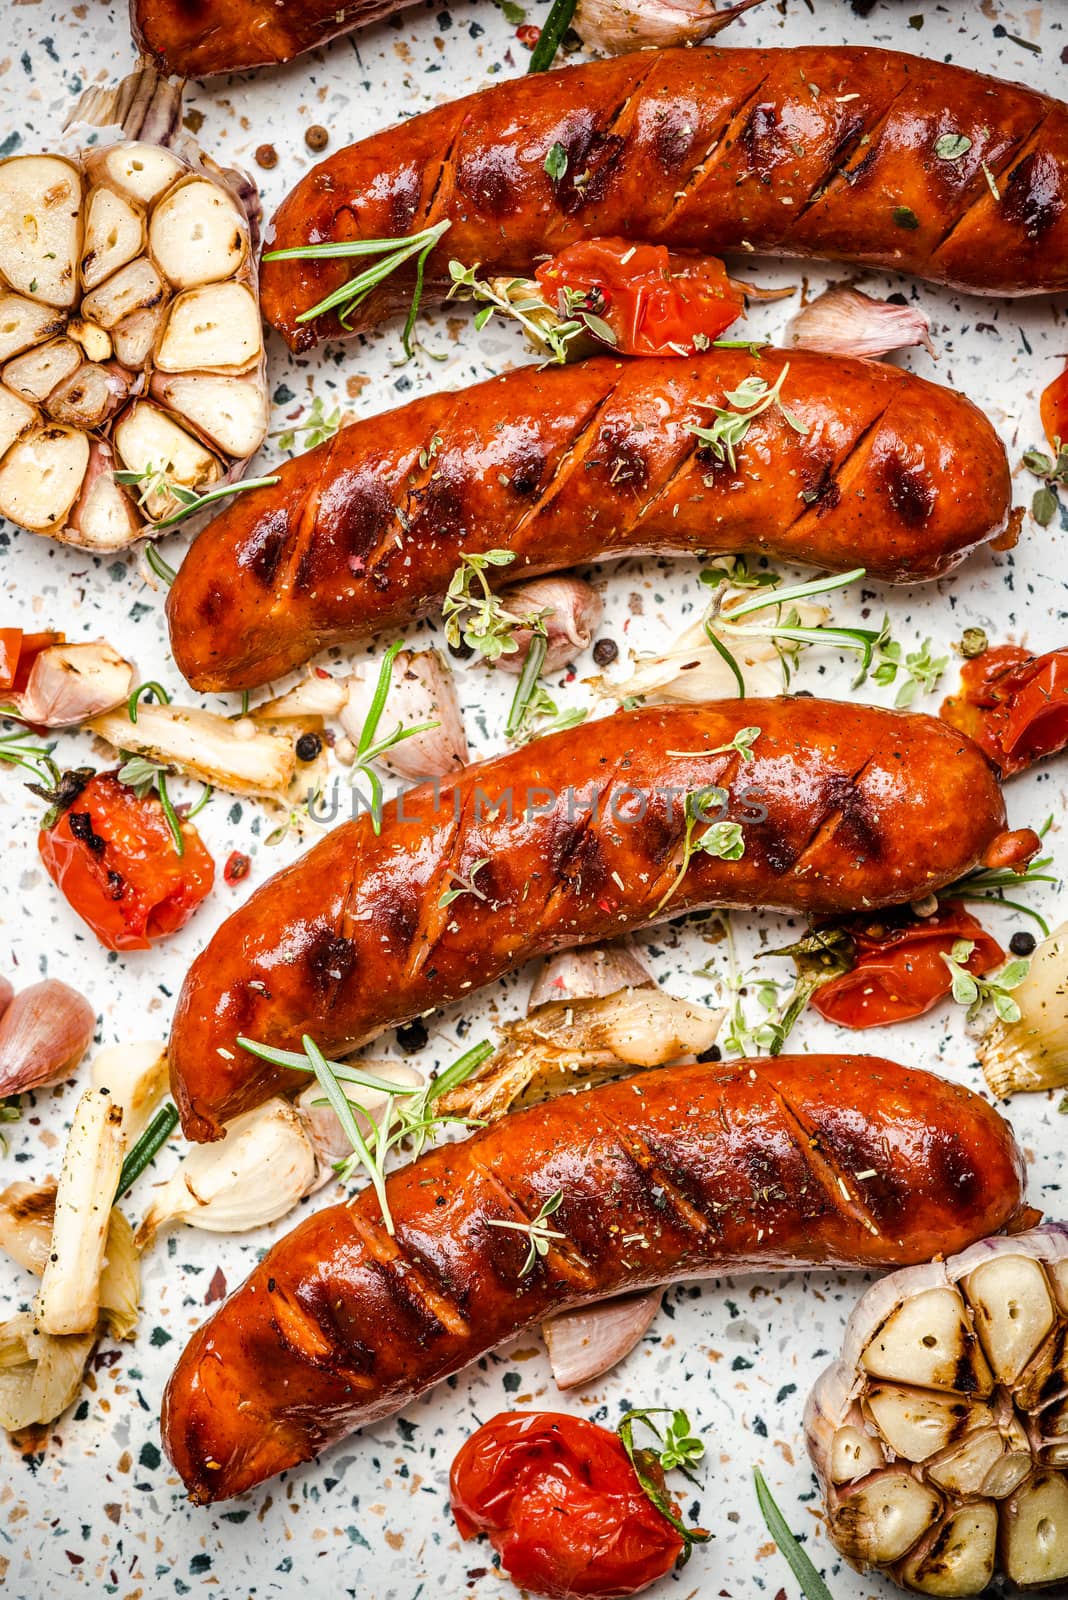 Serving Grilled Barbecue Sausage with BBQ Vegetables and Herbs.